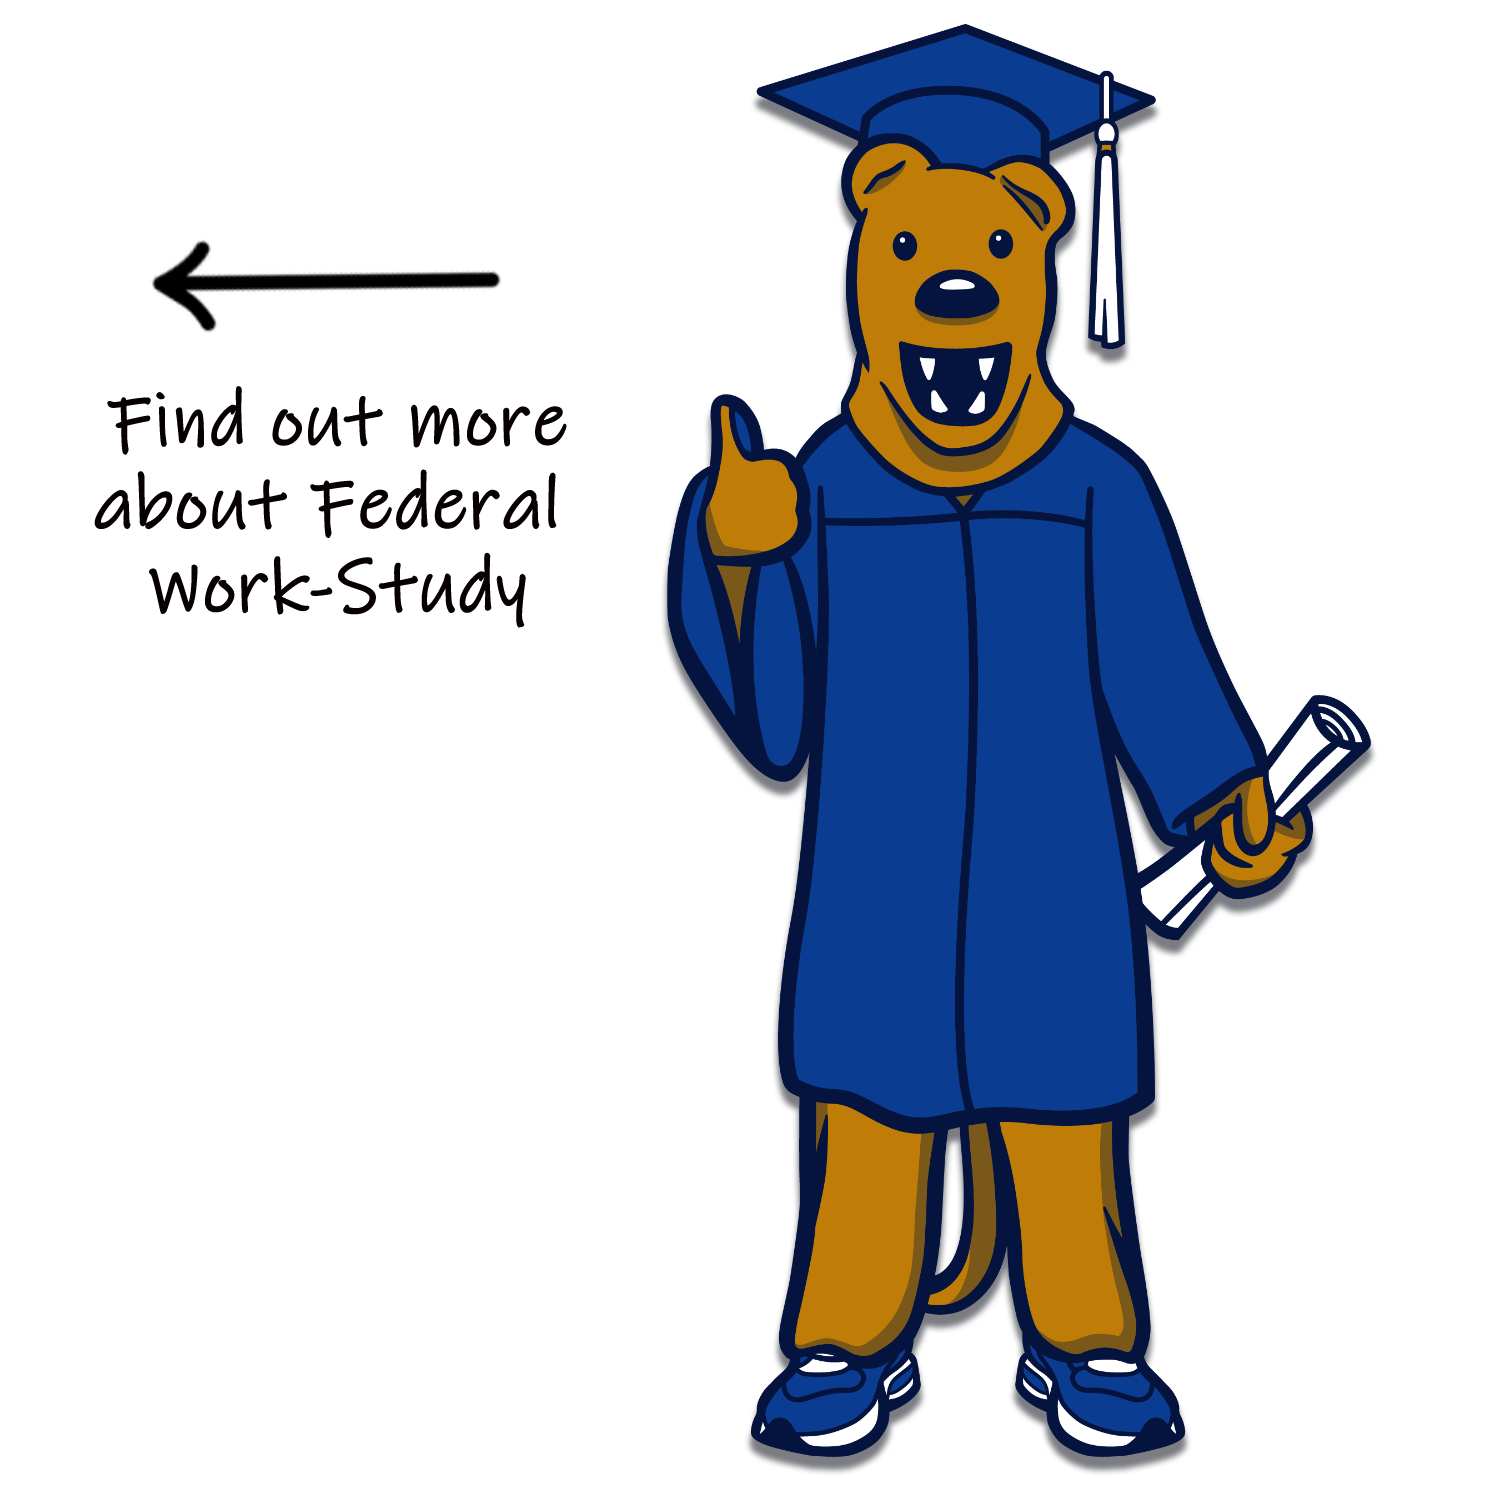 Cartoon Nittany Lion with cap and gown.